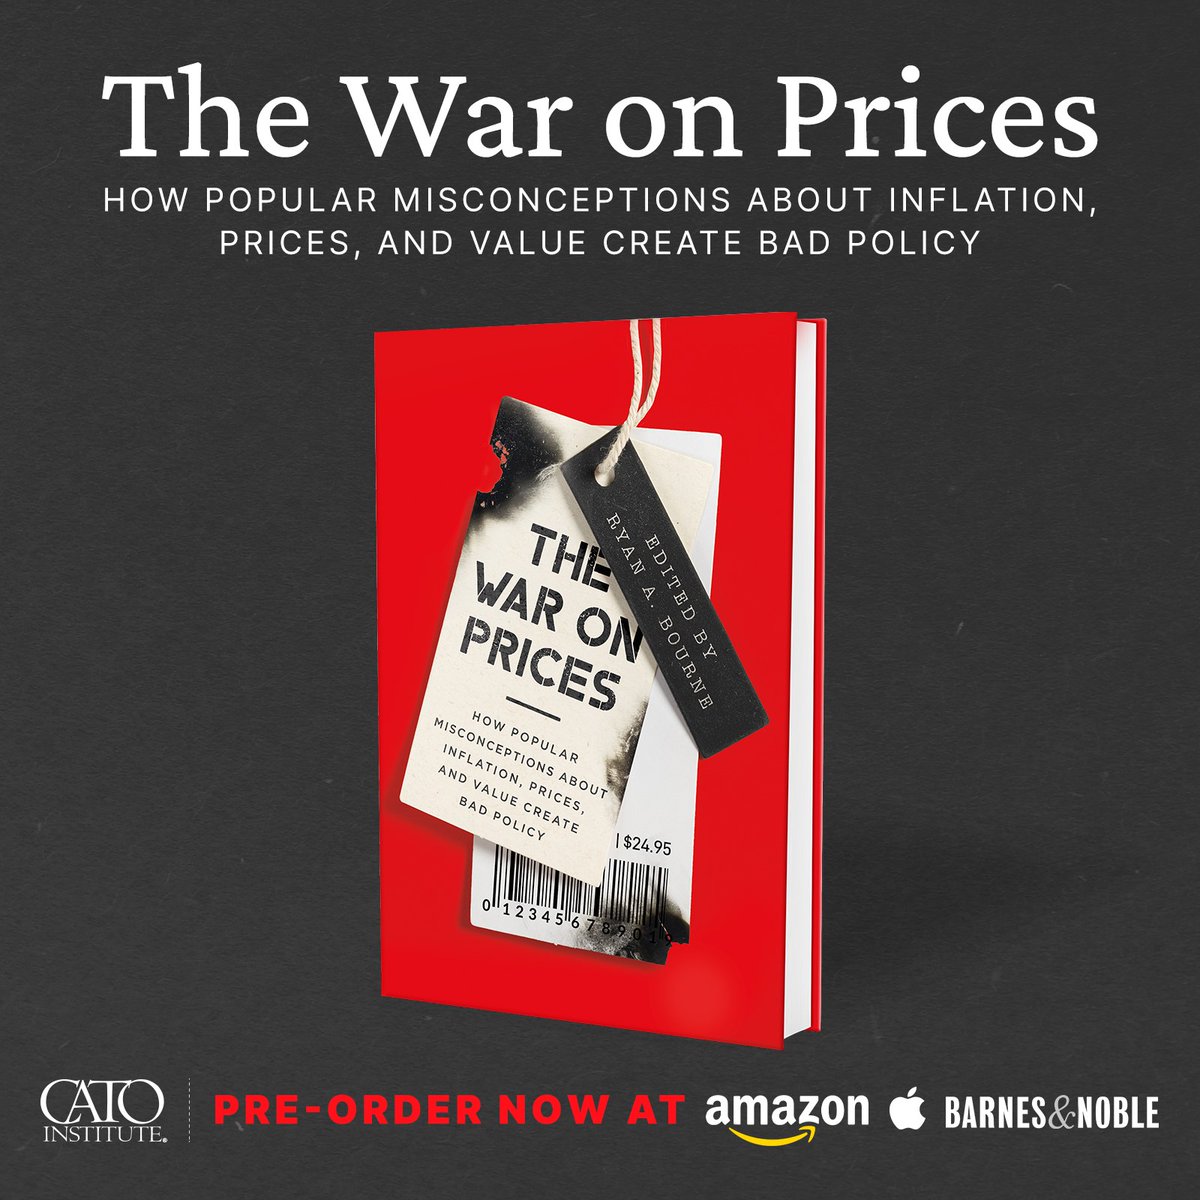 Costly Ignorance. My new essay for @CityJournal explaining the origins of governments' new #WarOnPrices, ahead of the launch of the book of that title next week. city-journal.org/article/war-on…